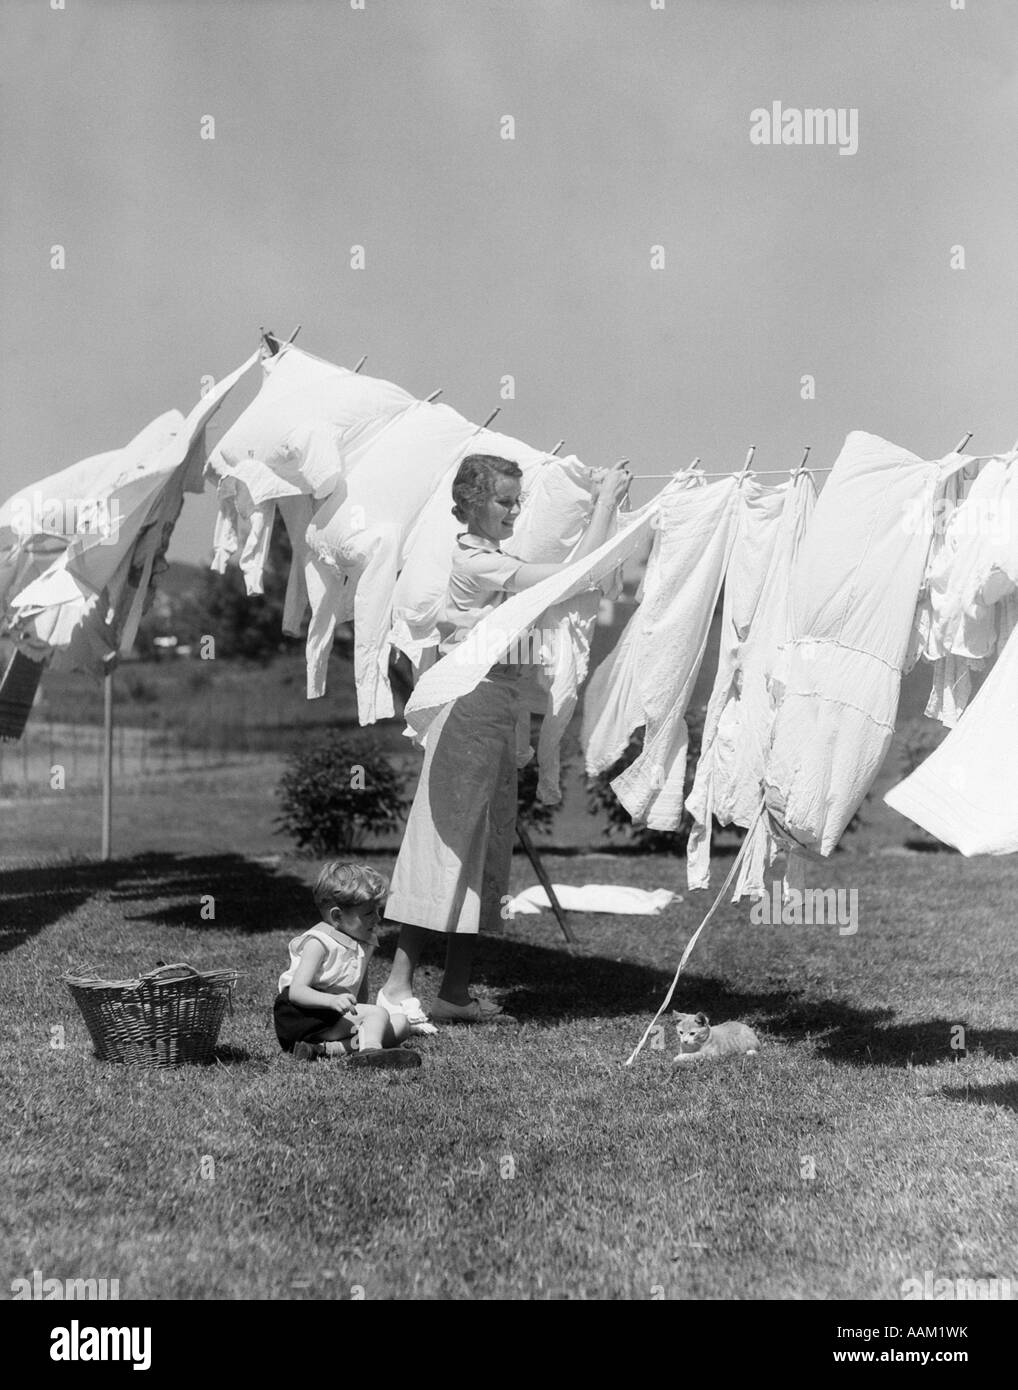 1930s WOMAN IN WHITE COTTON DRESS HANGING A FULL LINE OF CLOTHES IN THE BREEZE WITH A LITTLE BOY & CAT AT HER FEET Stock Photo